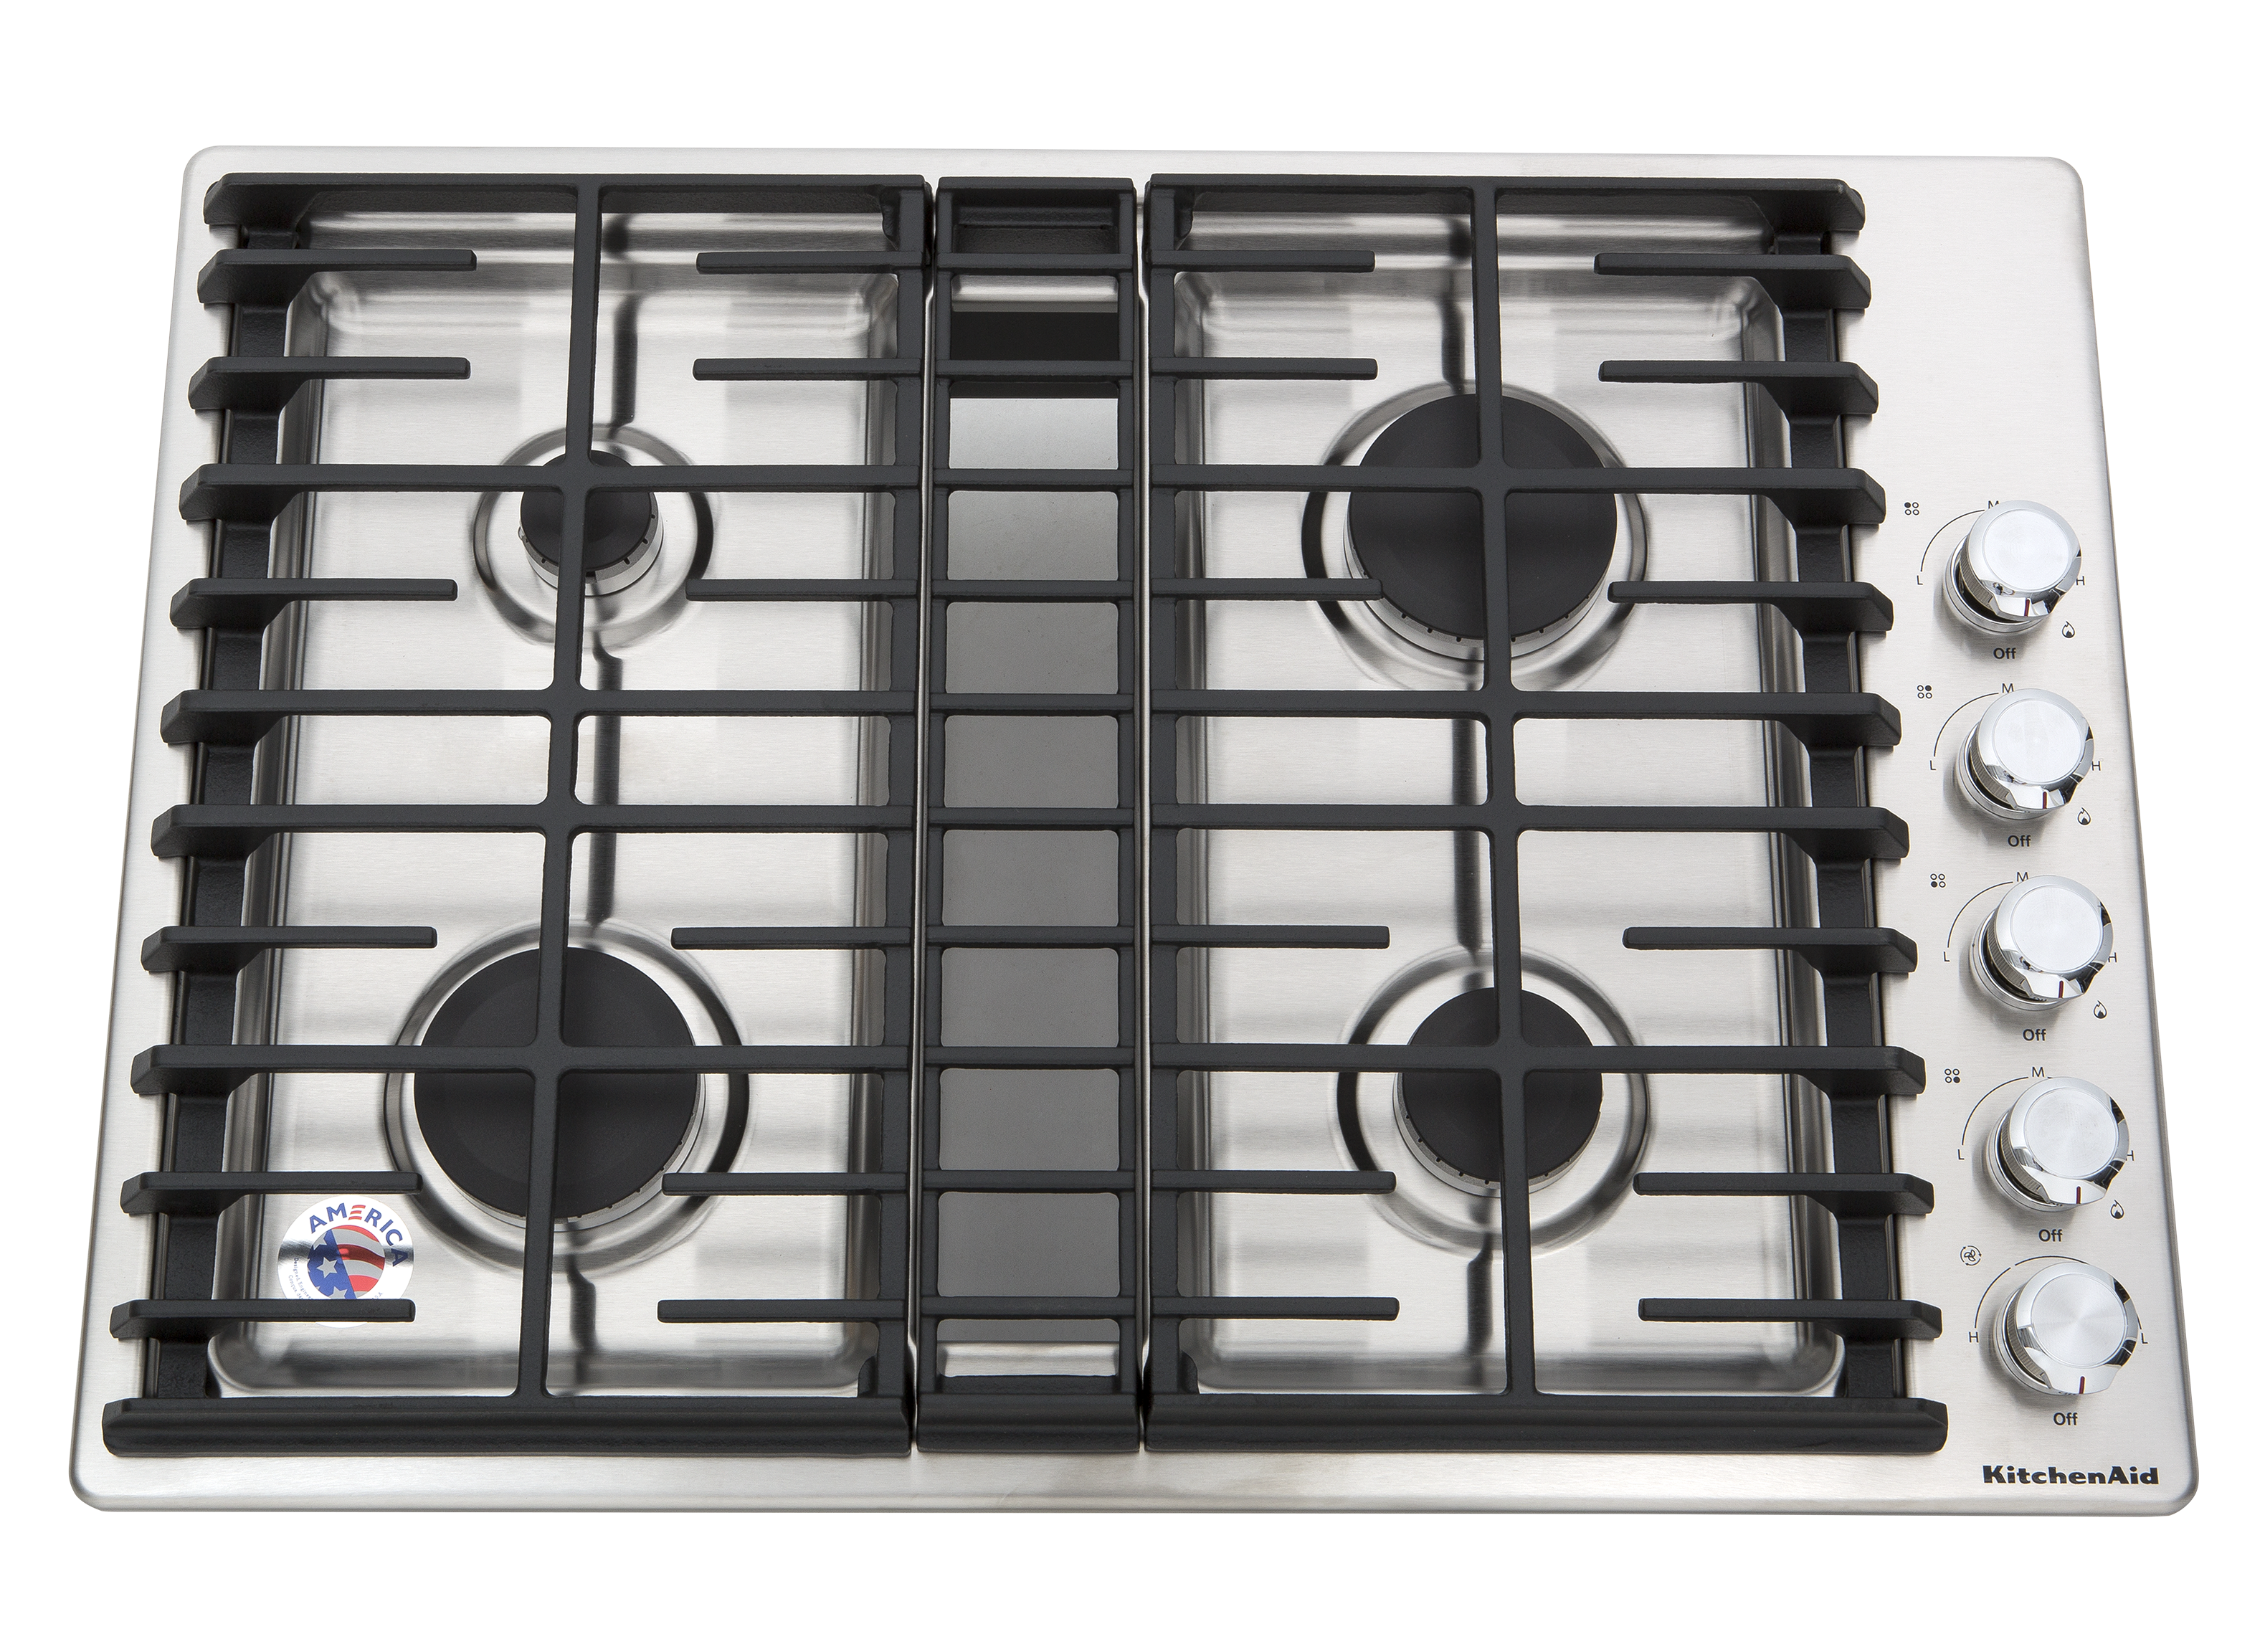 https://crdms.images.consumerreports.org/prod/products/cr/models/393564-gascooktops-kitchenaid-kcgd500gss.png